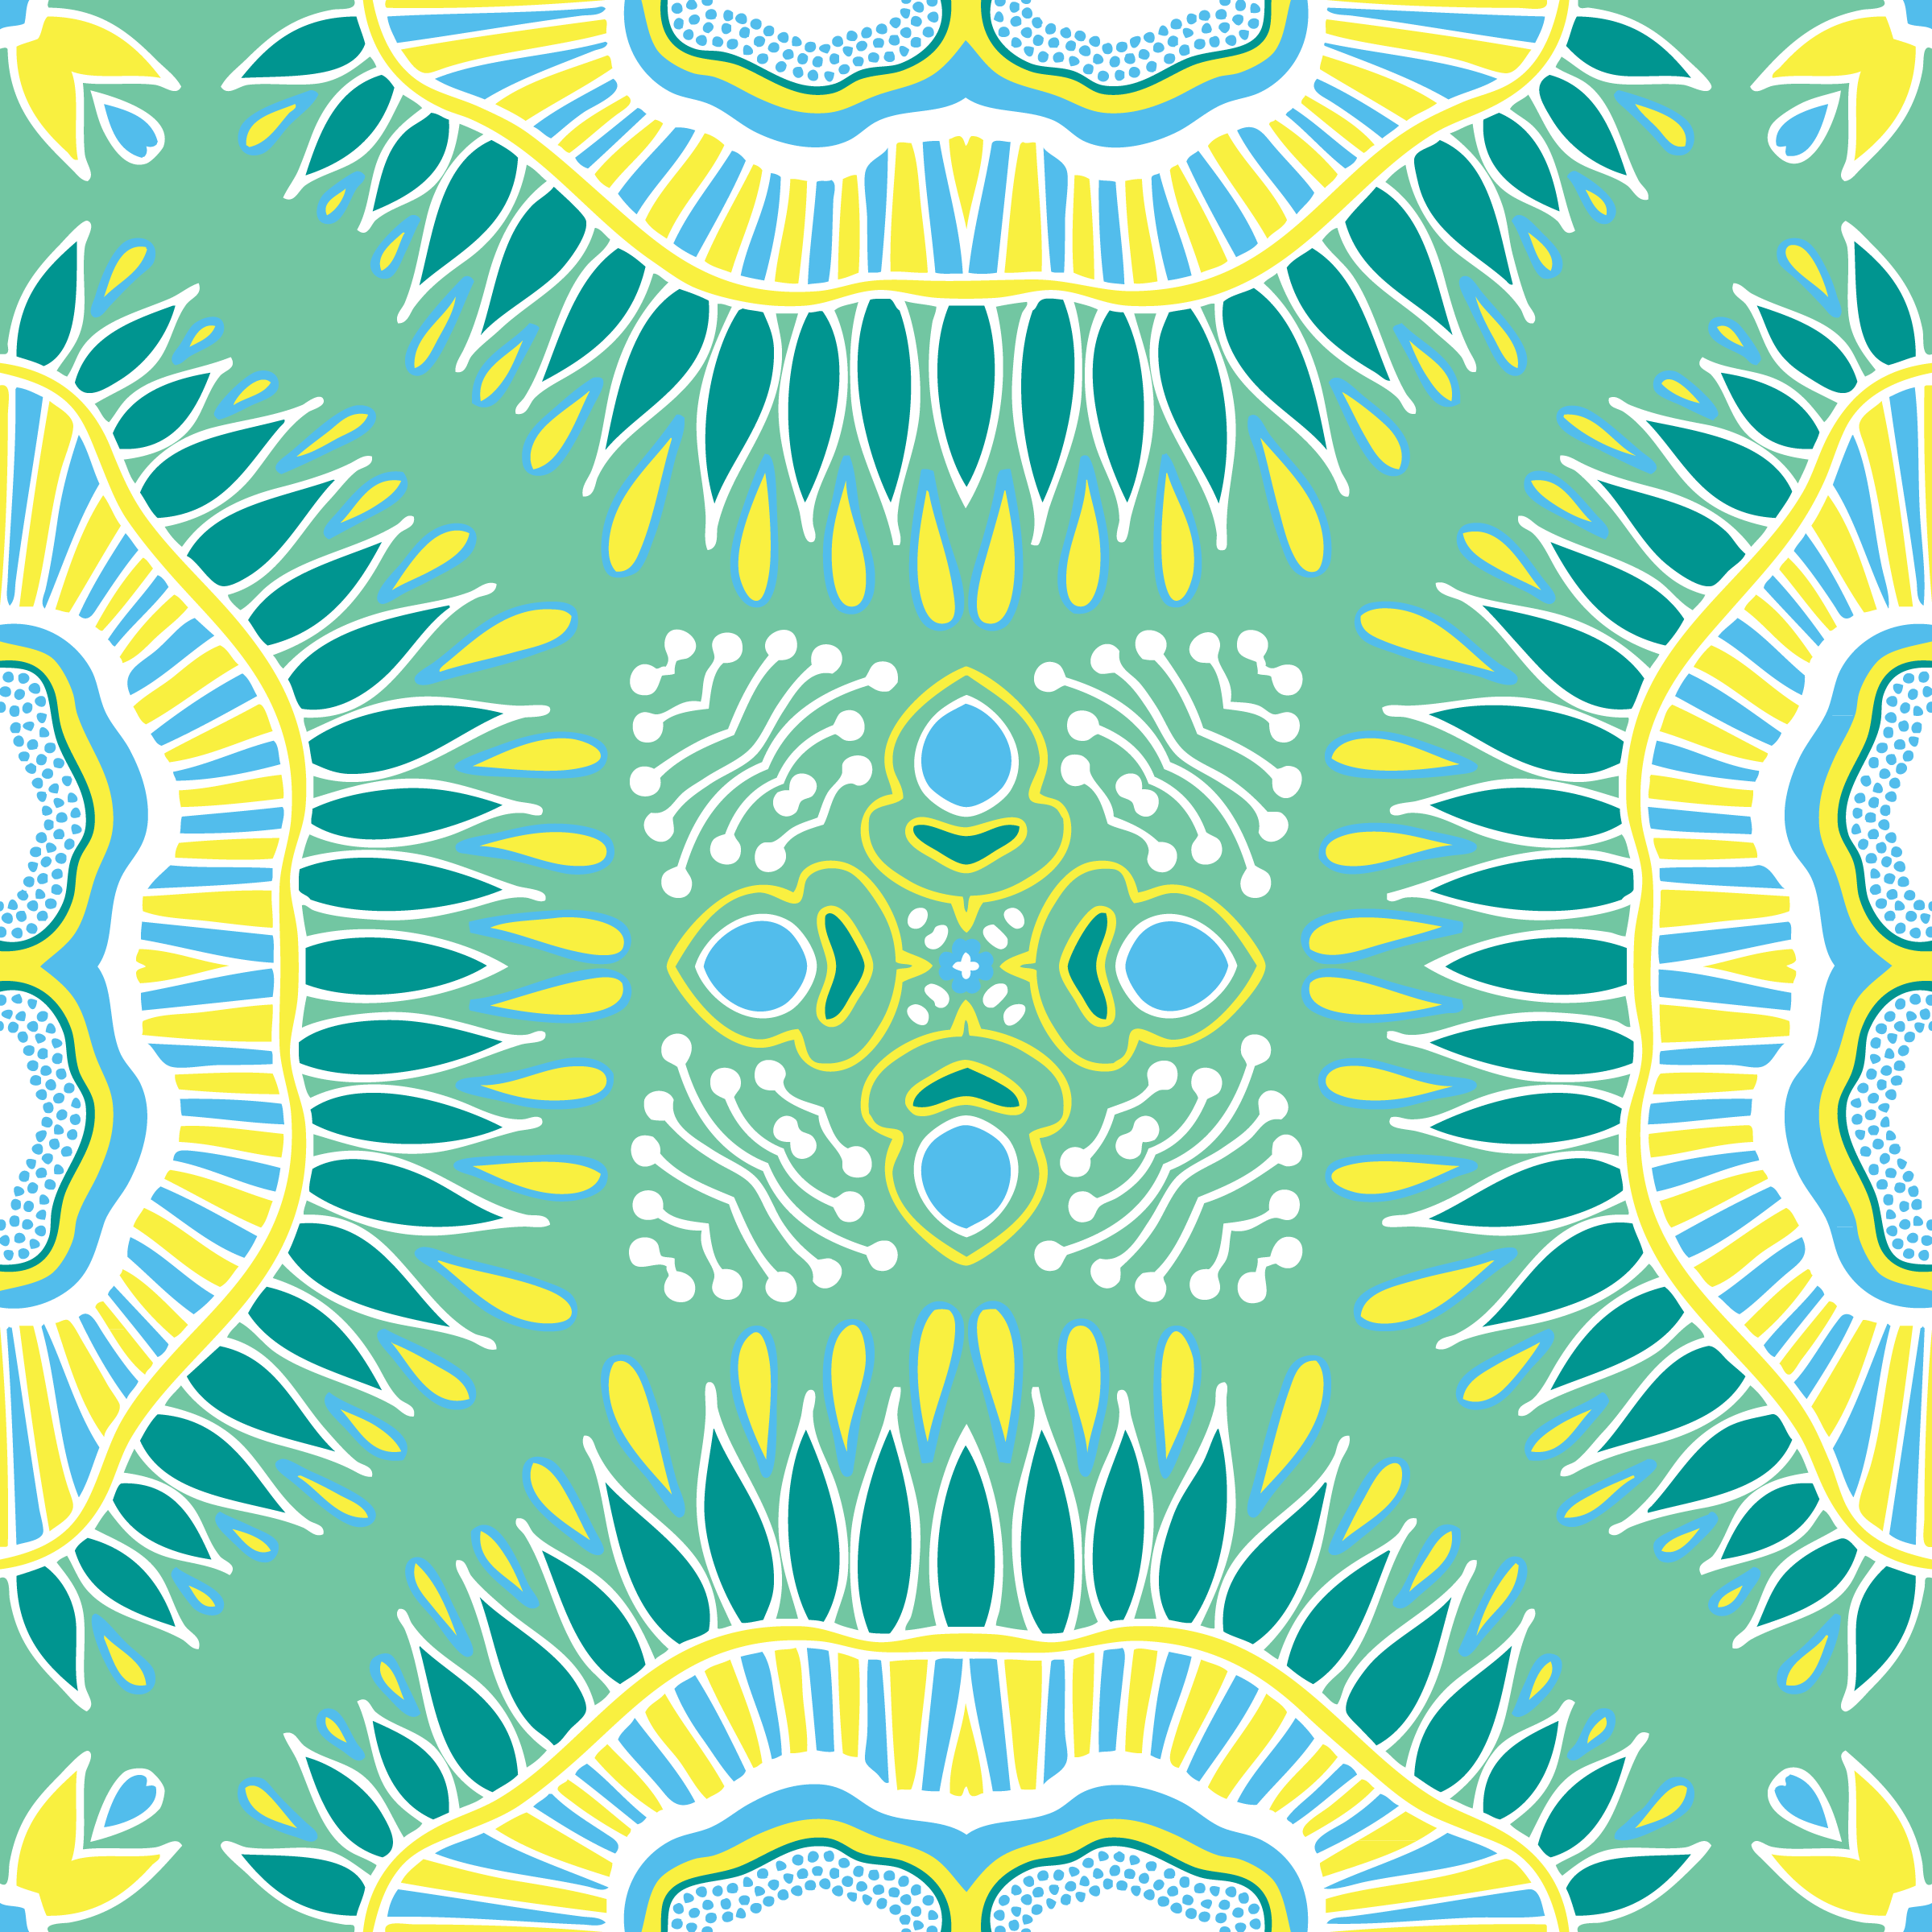 Design-6-blue-yellow-green.png